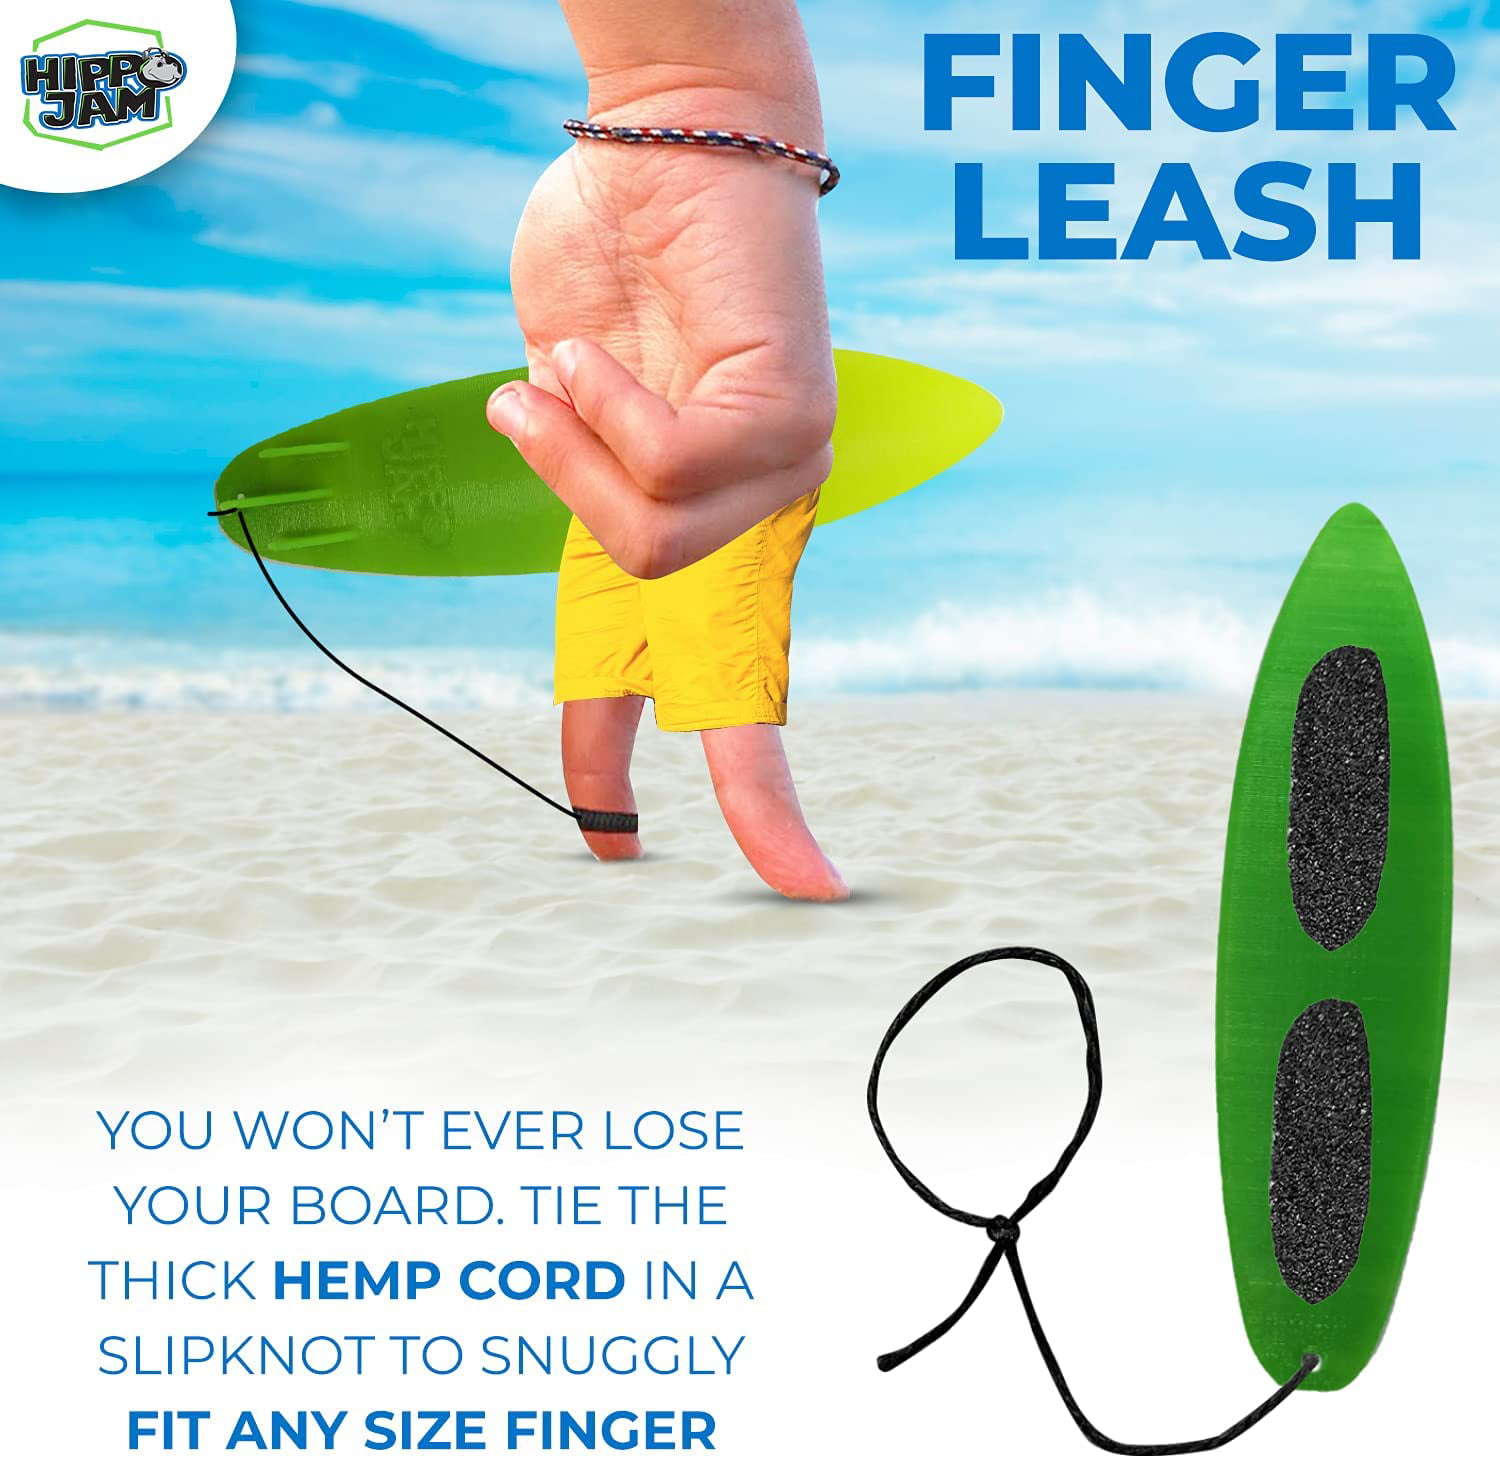 Hippo Jam Finger Surfboard for Wind and Mini Longboard Bundle with Finger Leash Grip Tape and Miniature Surfboard Display Stand 